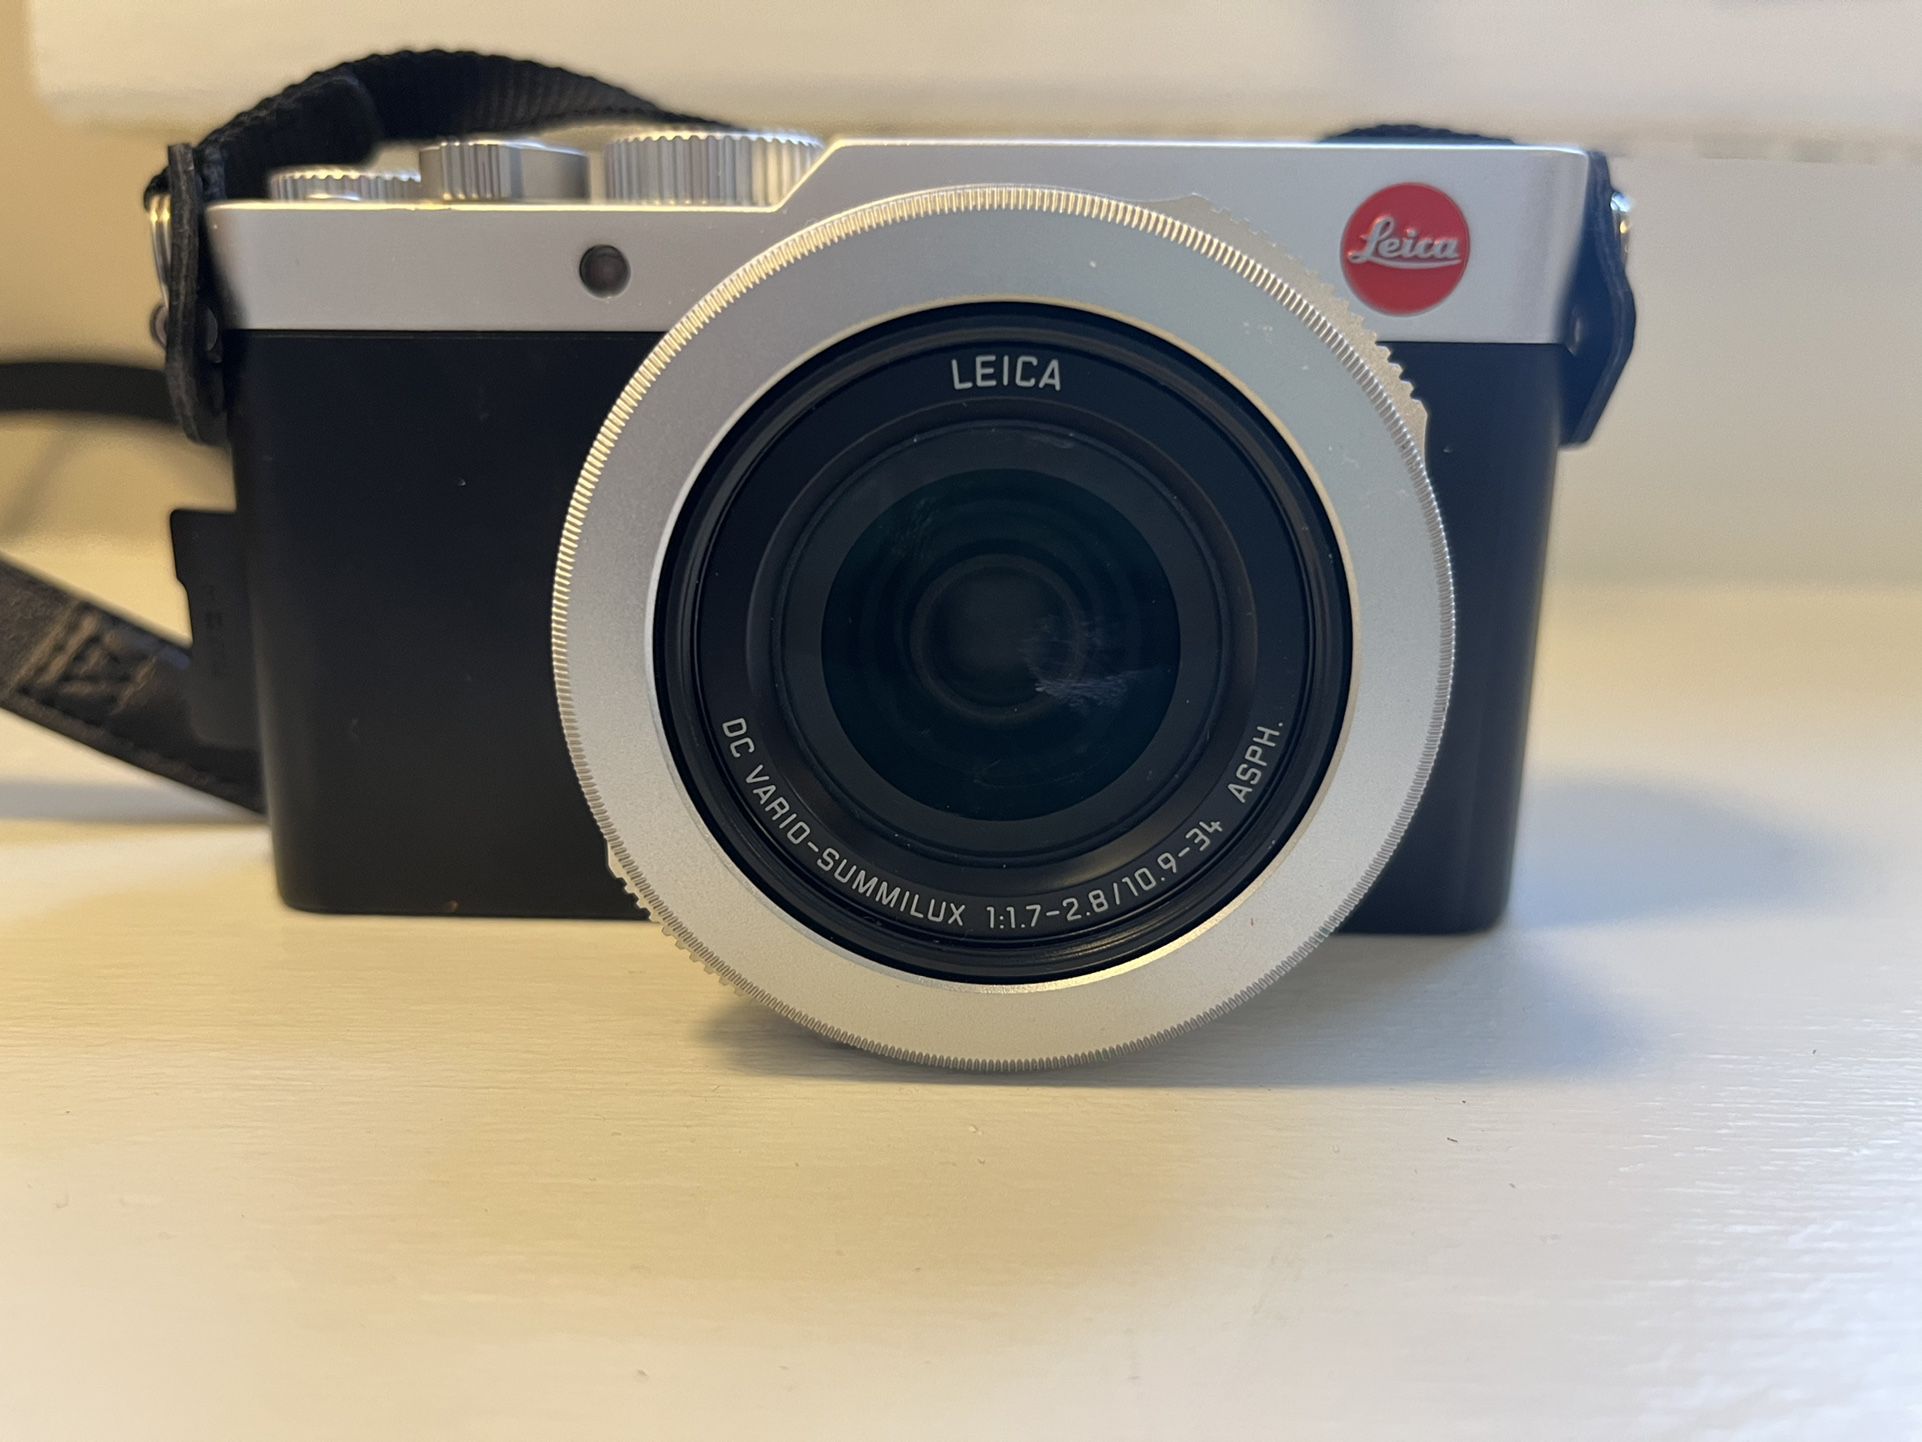 Leica D-lux 7 Digital Camera for Sale in Los Angeles, CA - OfferUp